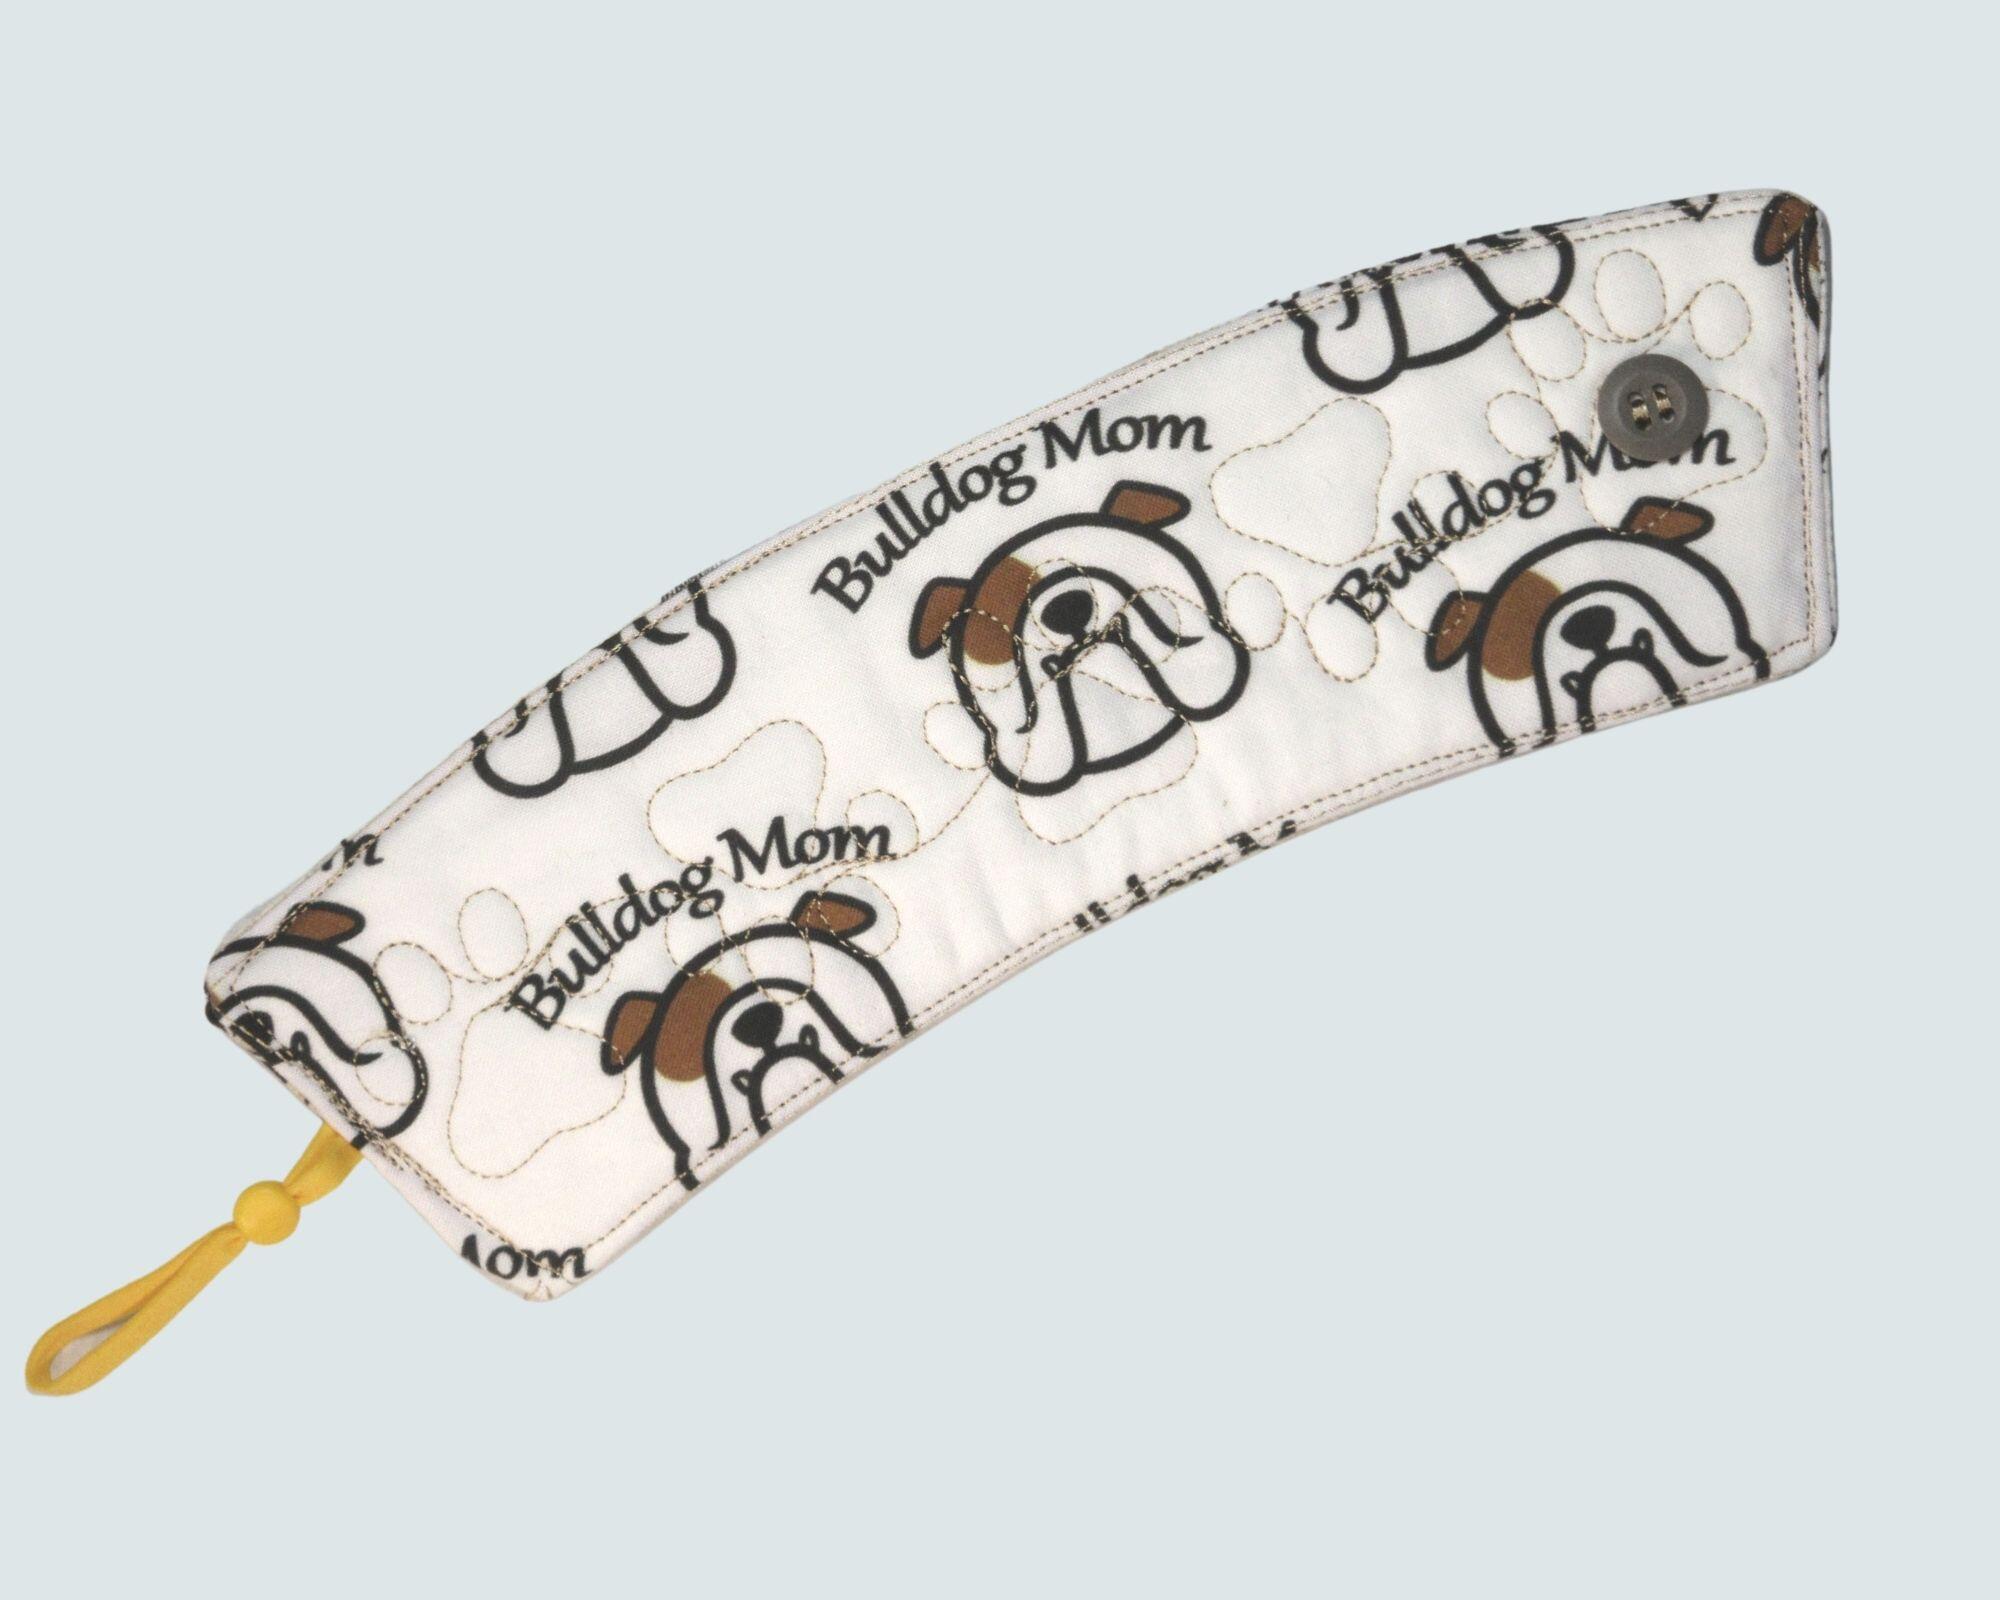 Bulldog Mom beverage sleeve adjustable and quilted with paw prints